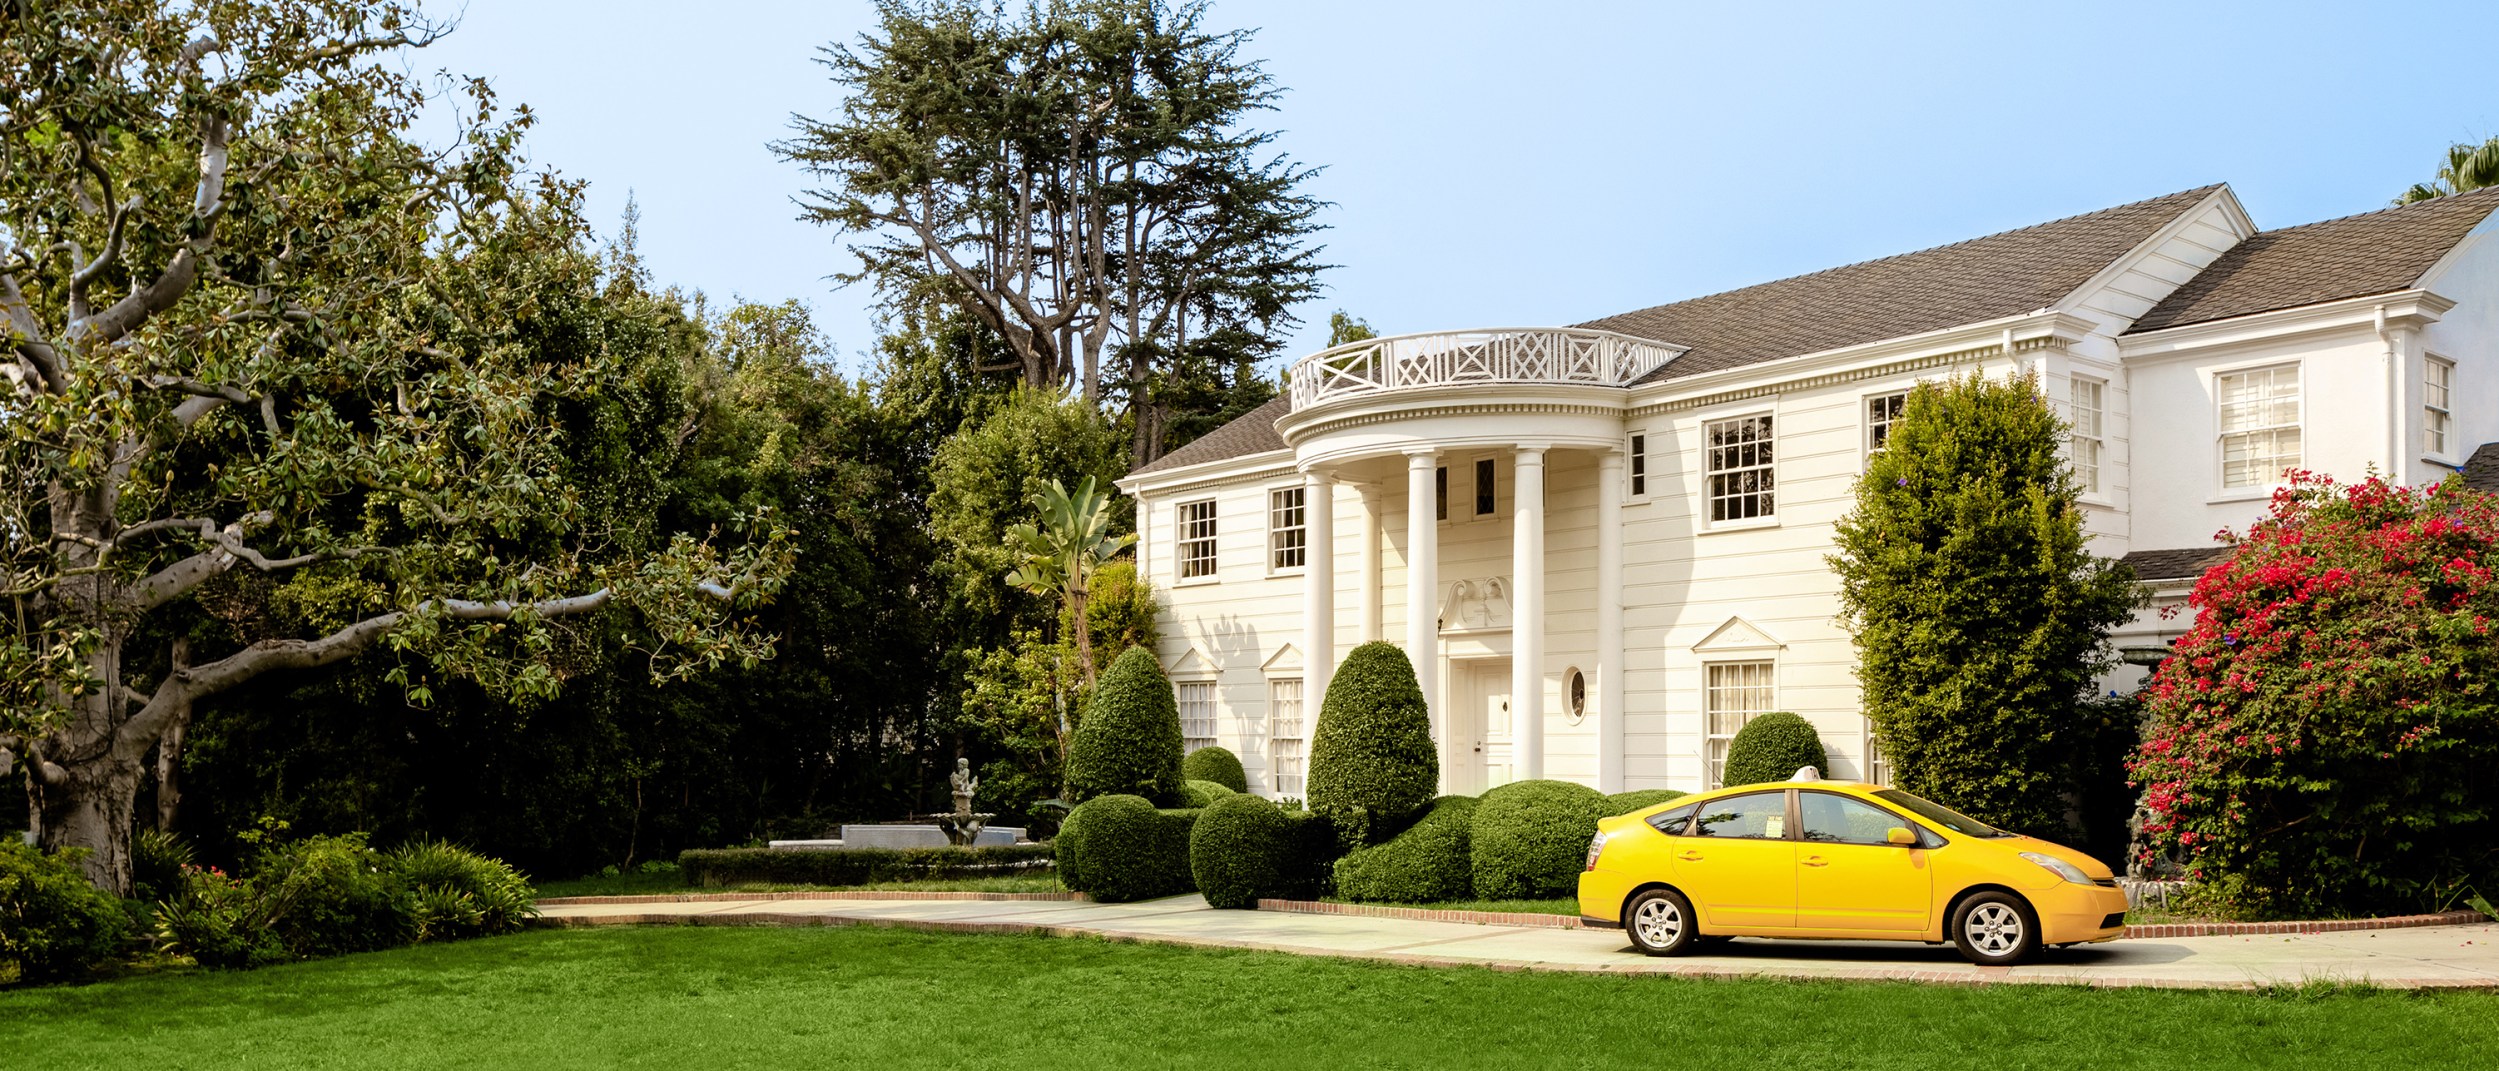 A taxi arrives at the mansion featured in the Fresh Prince of Bel-Air TV show.